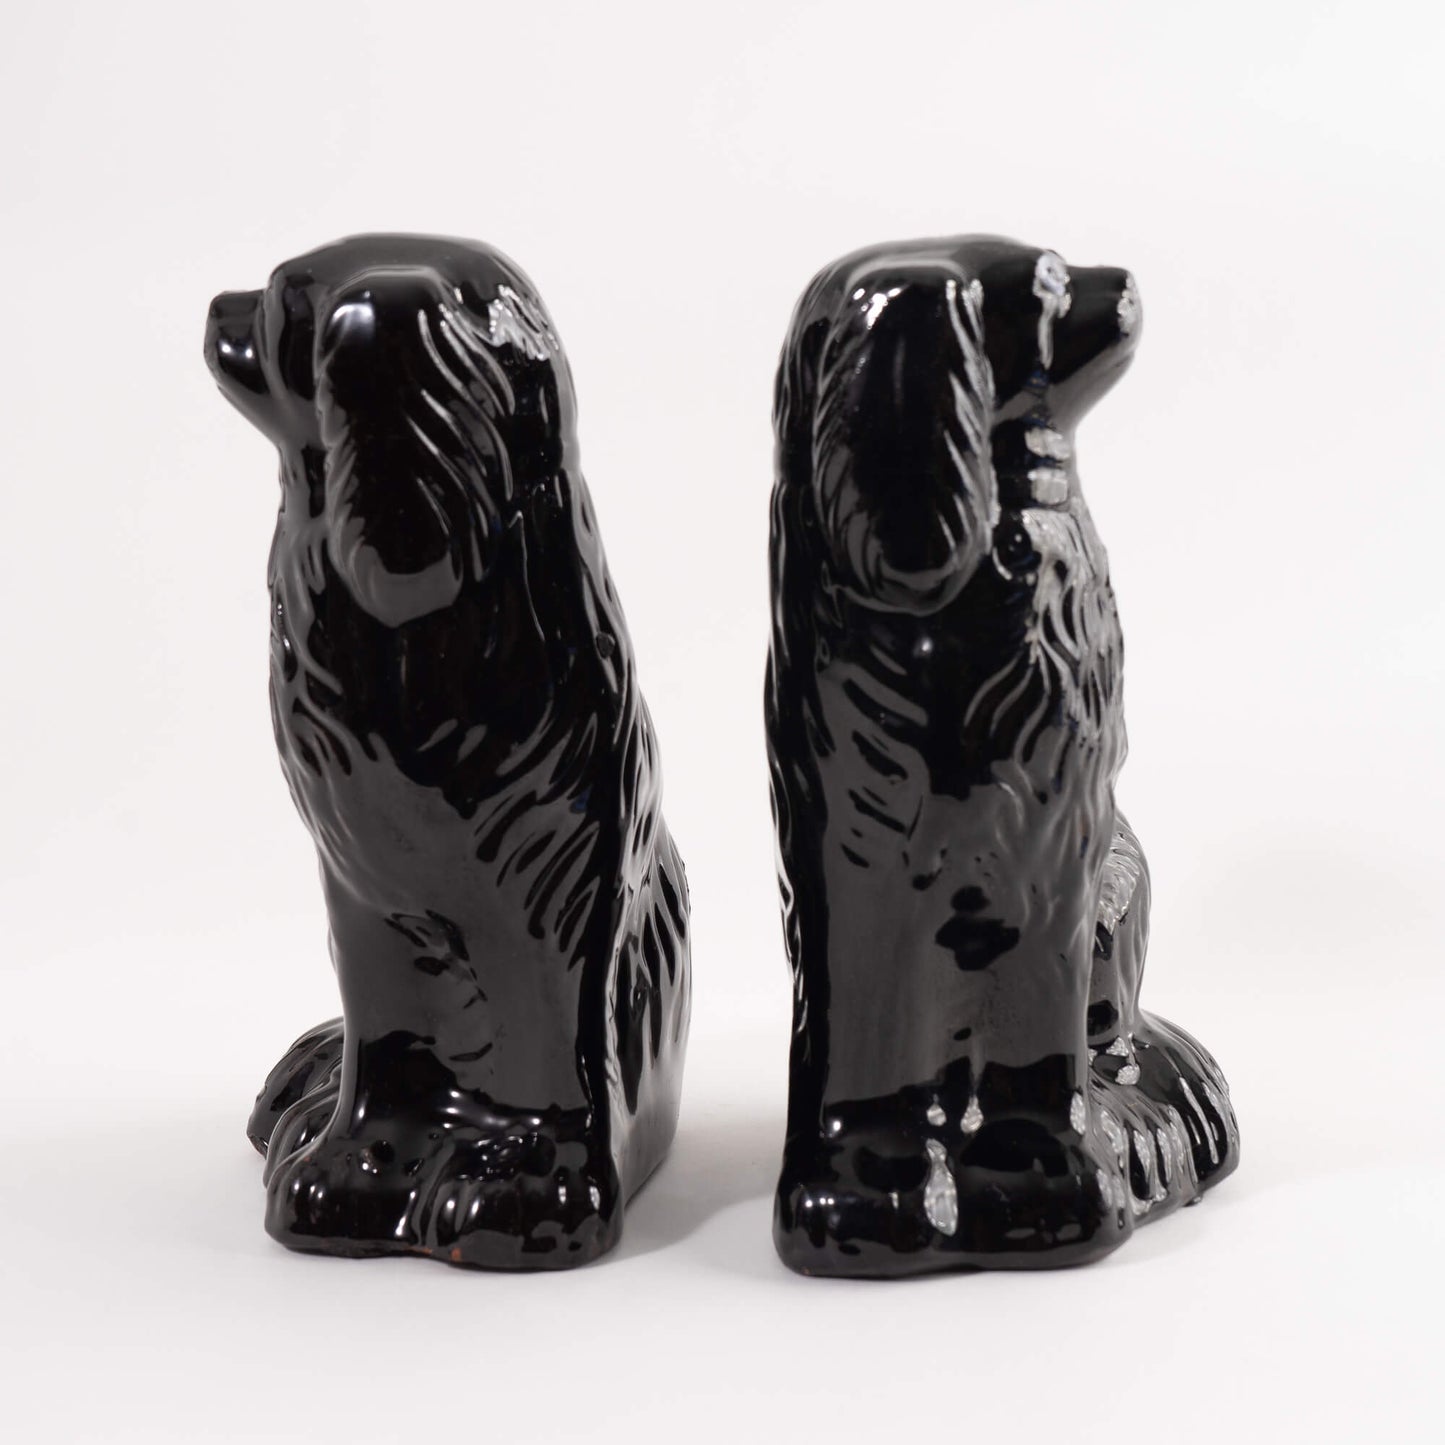 19th Century Antique Victorian Black Glaze Jackfield Spaniels Staffordshire Dogs - Made in England - Traditional English Decor